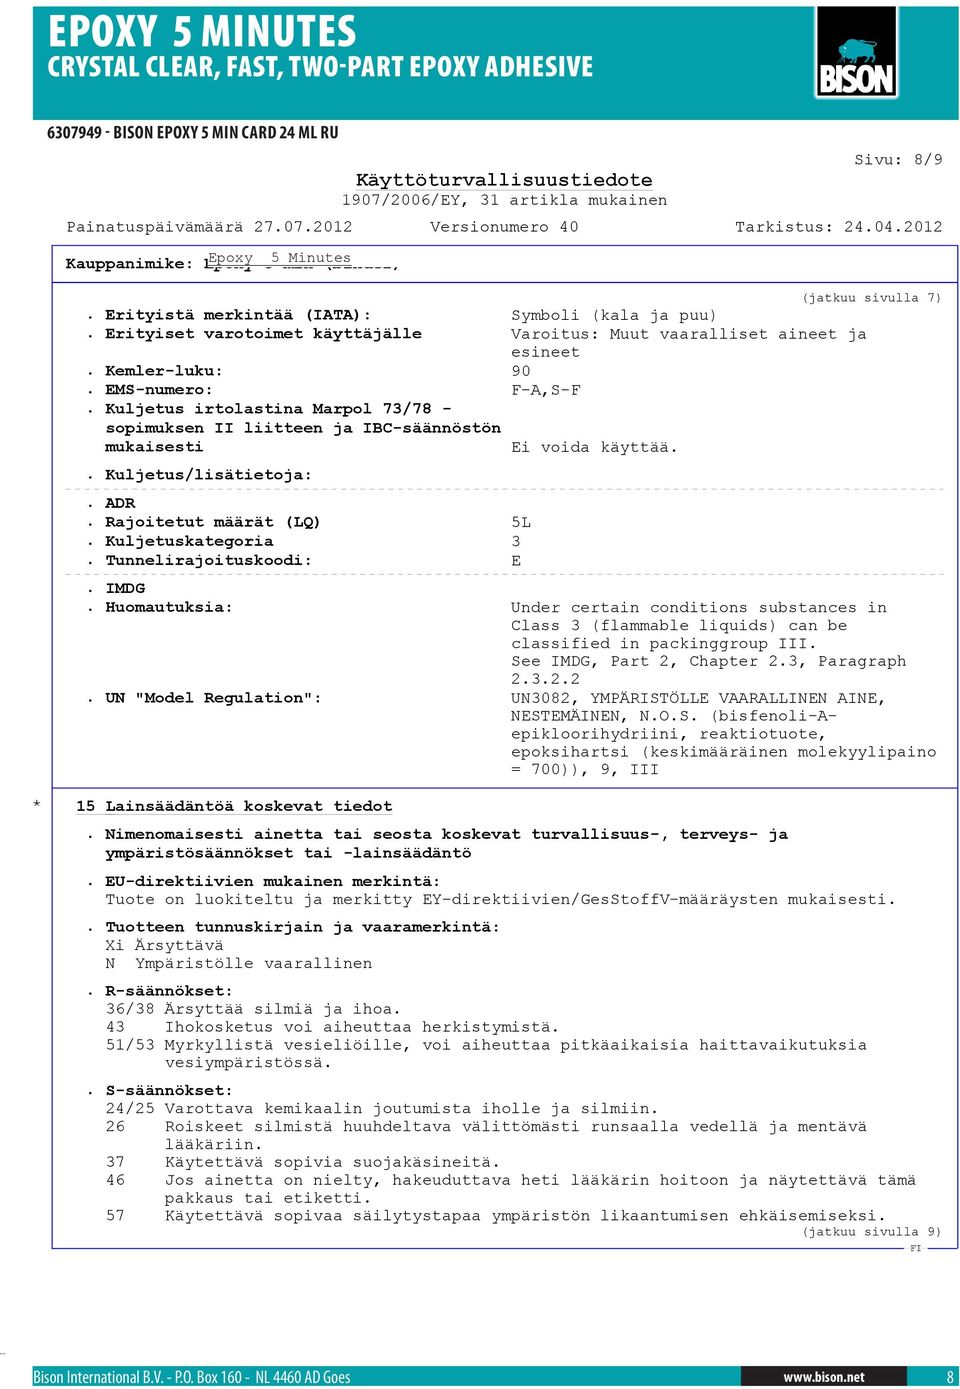 Tunnelirajoituskoodi: E. IMDG. Huomautuksia: Under certain conditions substances in Class 3 (flammable liquids) can be classified in packinggroup III. See IMDG, Part 2,